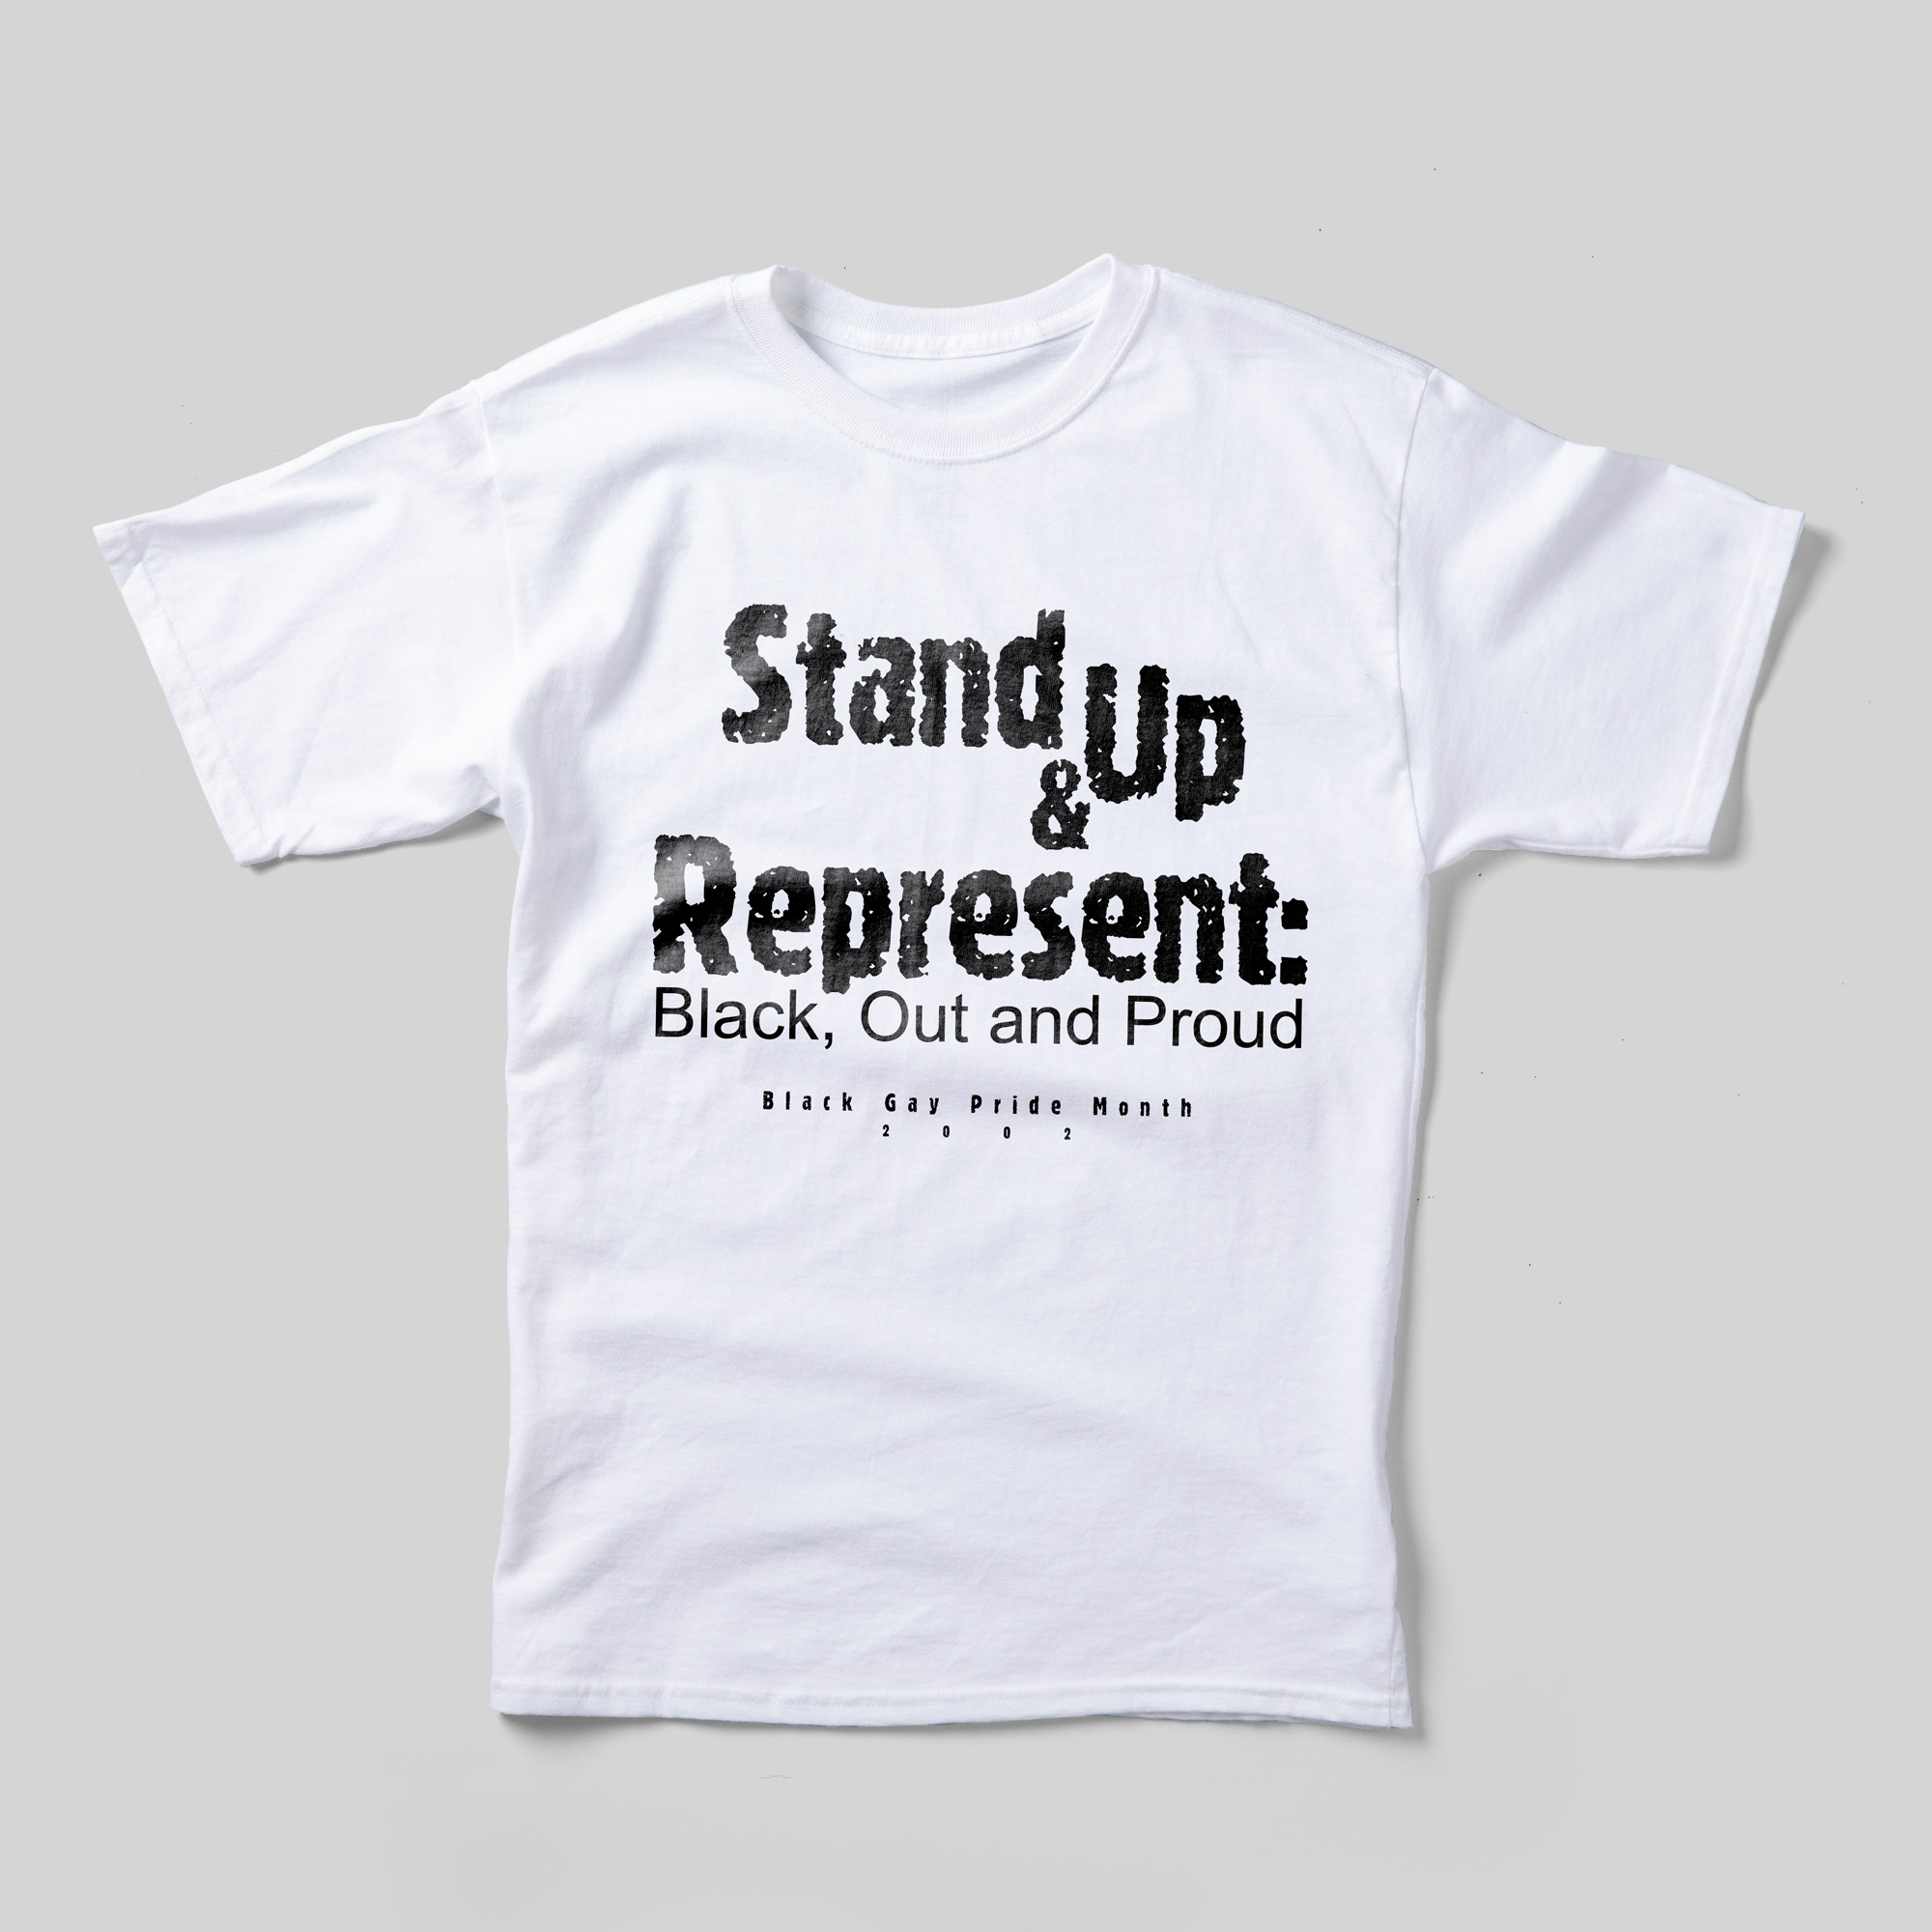 A white t-shirt that reads "Stand up & Represent: Black, Out and Proud Black Gay Pride Month 2002" in black.